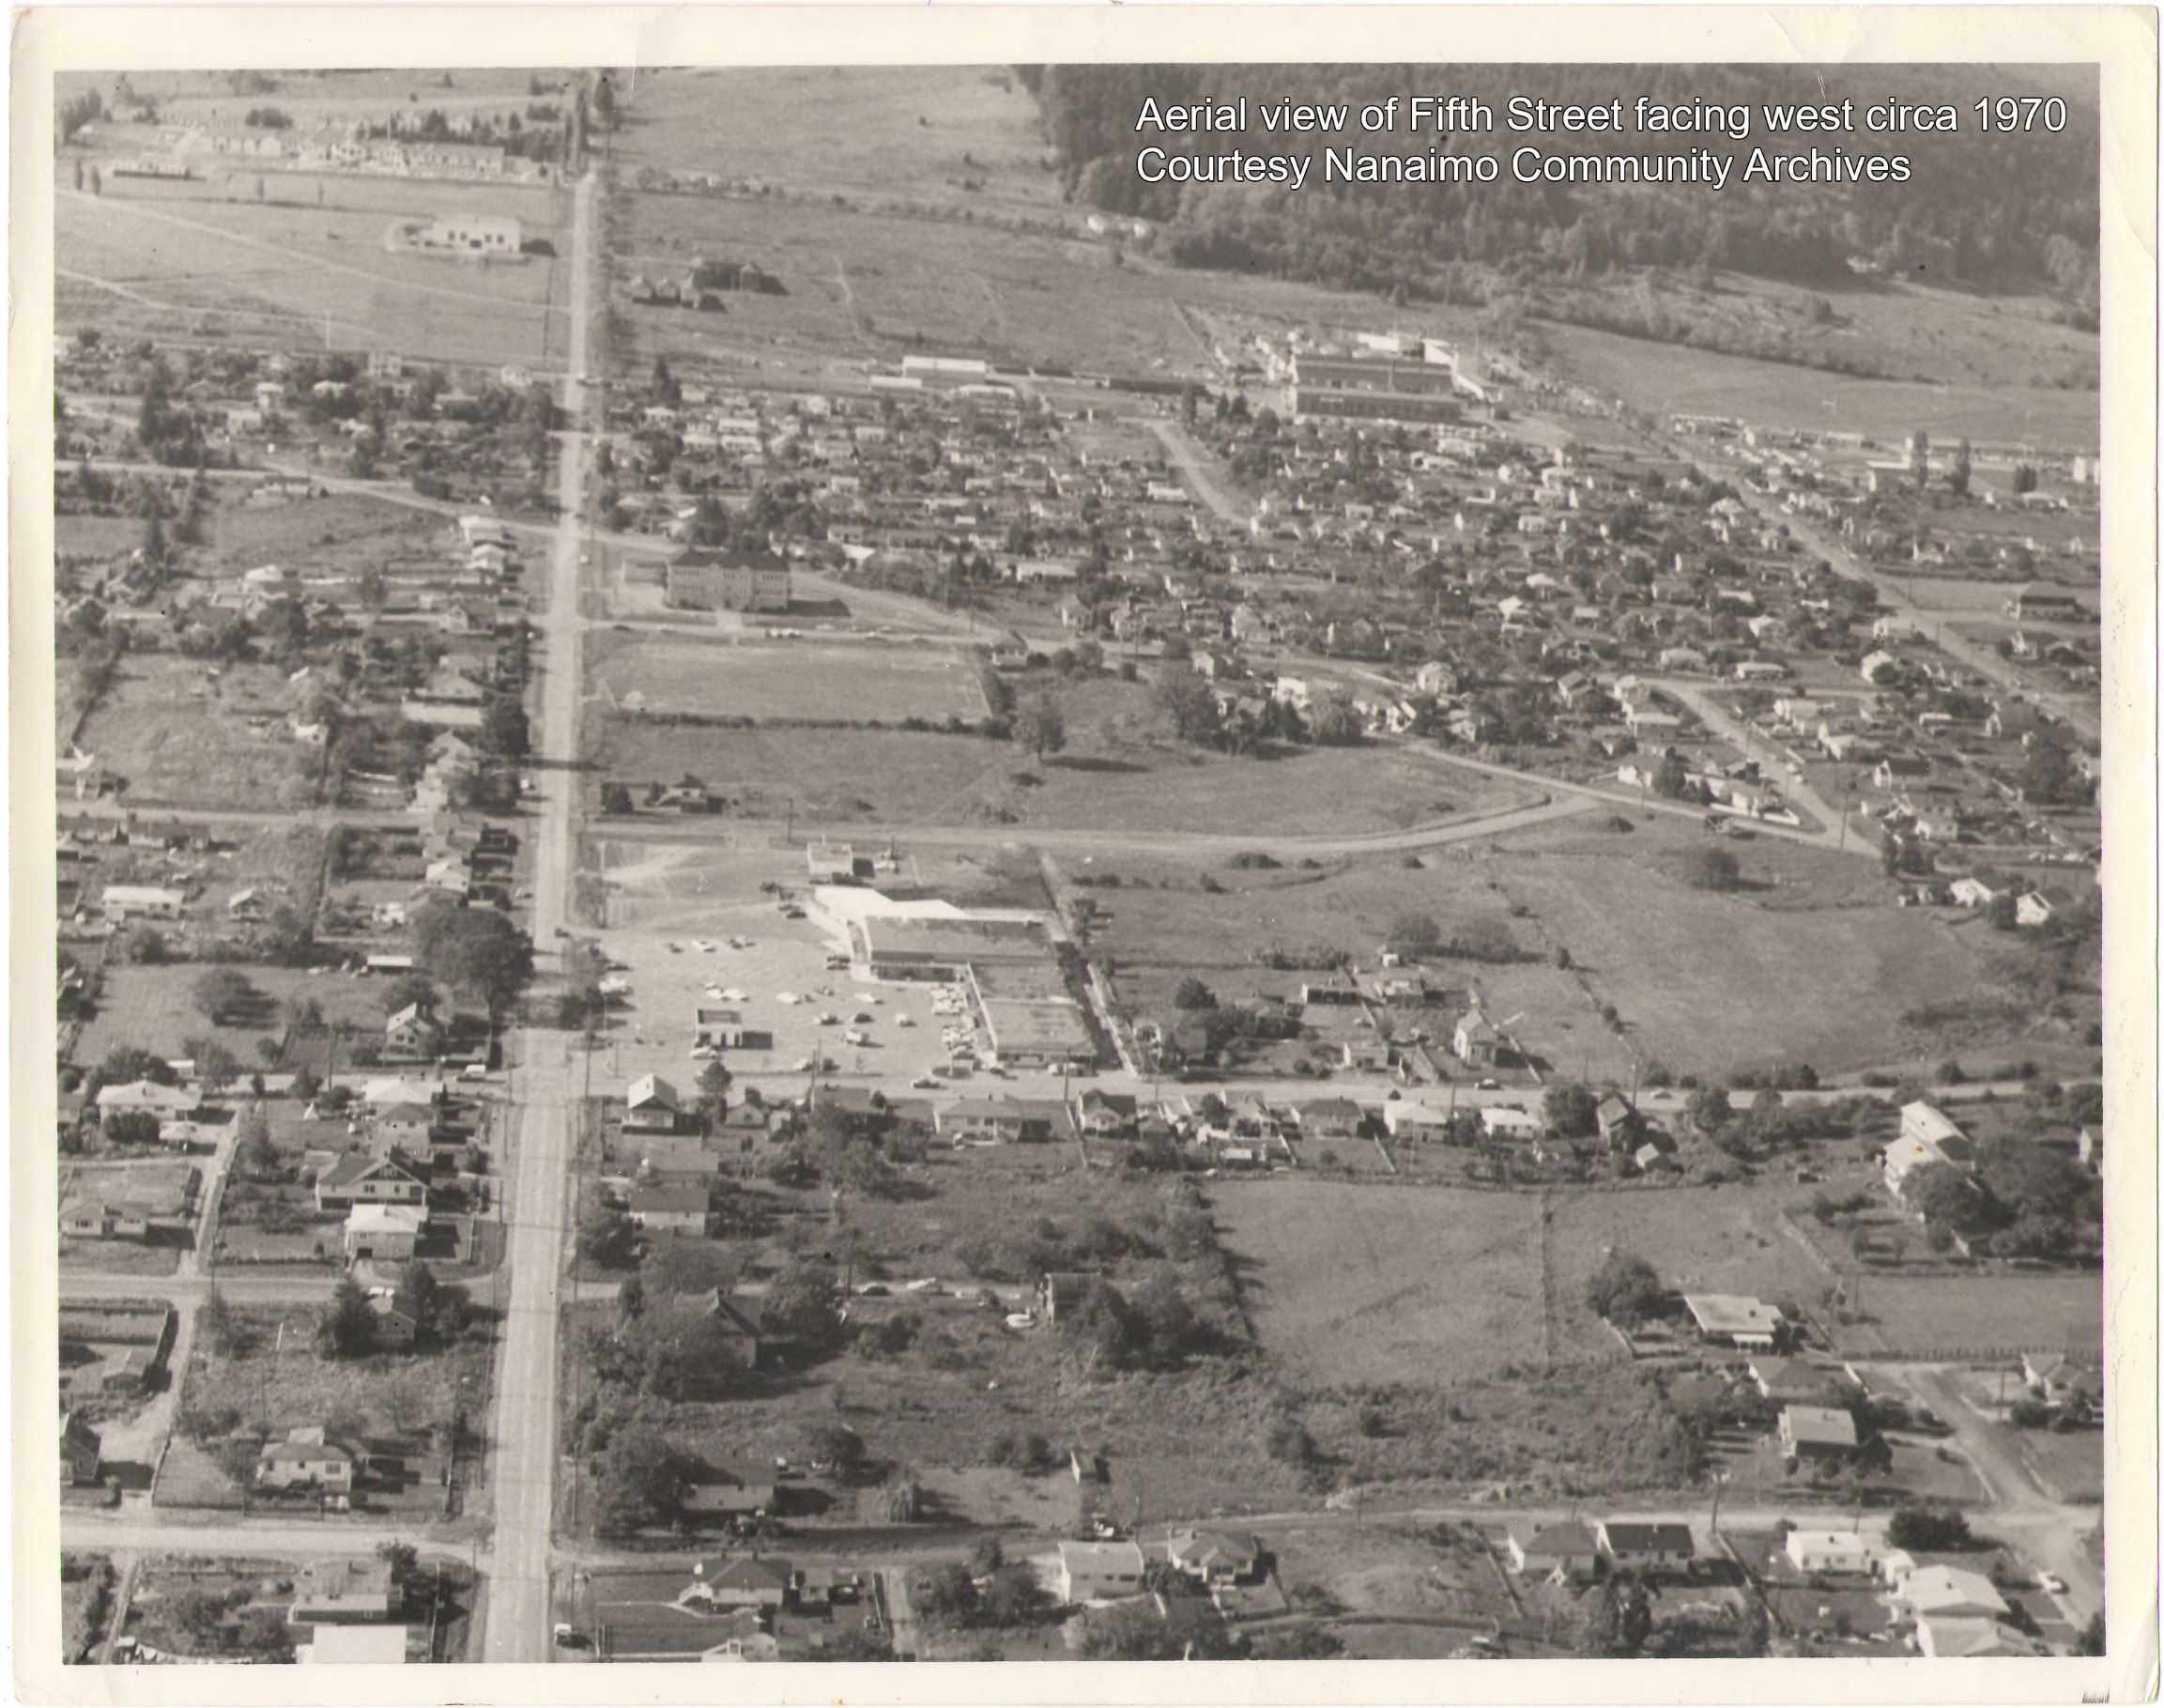 Aerial view of Fifth Street facing west circa 1970 - Courtesy Nanaimo Community Archives